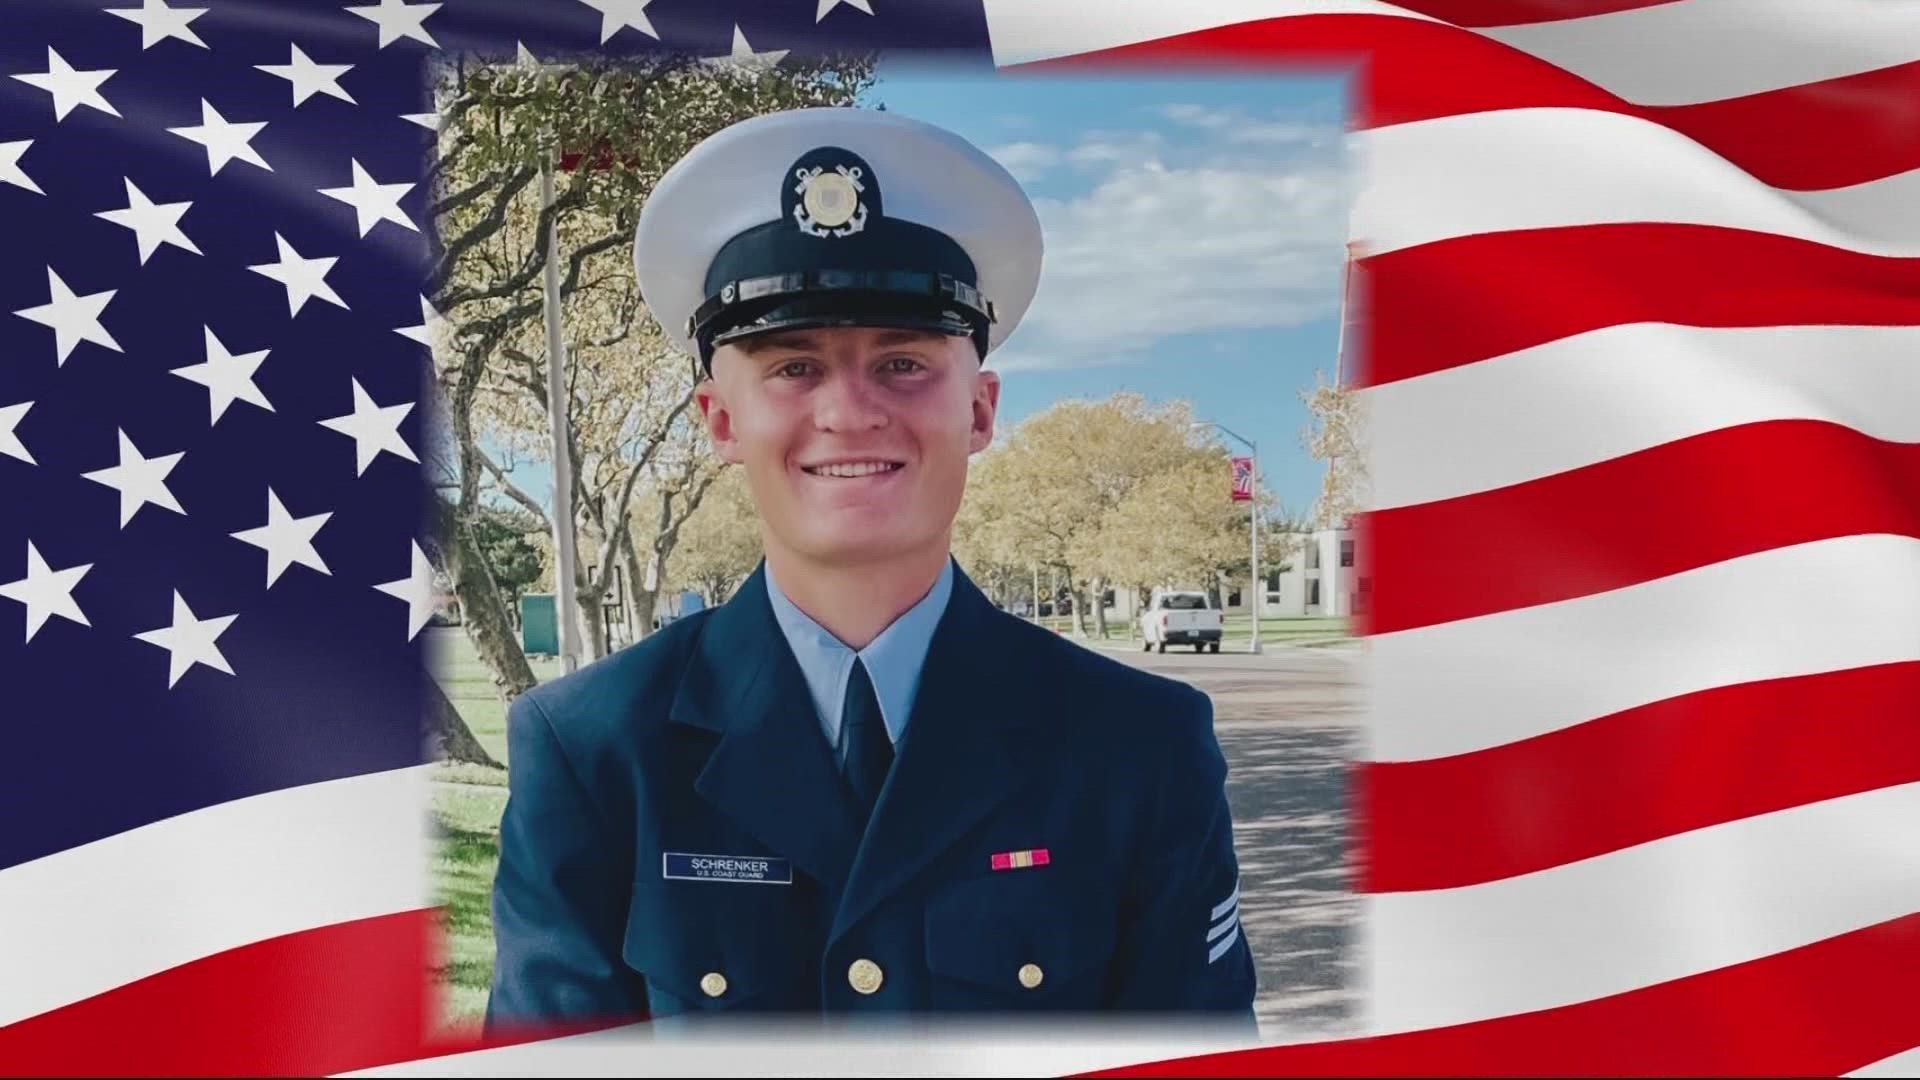 Noah Schrenker graduated from Creekside High School this year and decided to join the United States Coast Guard.